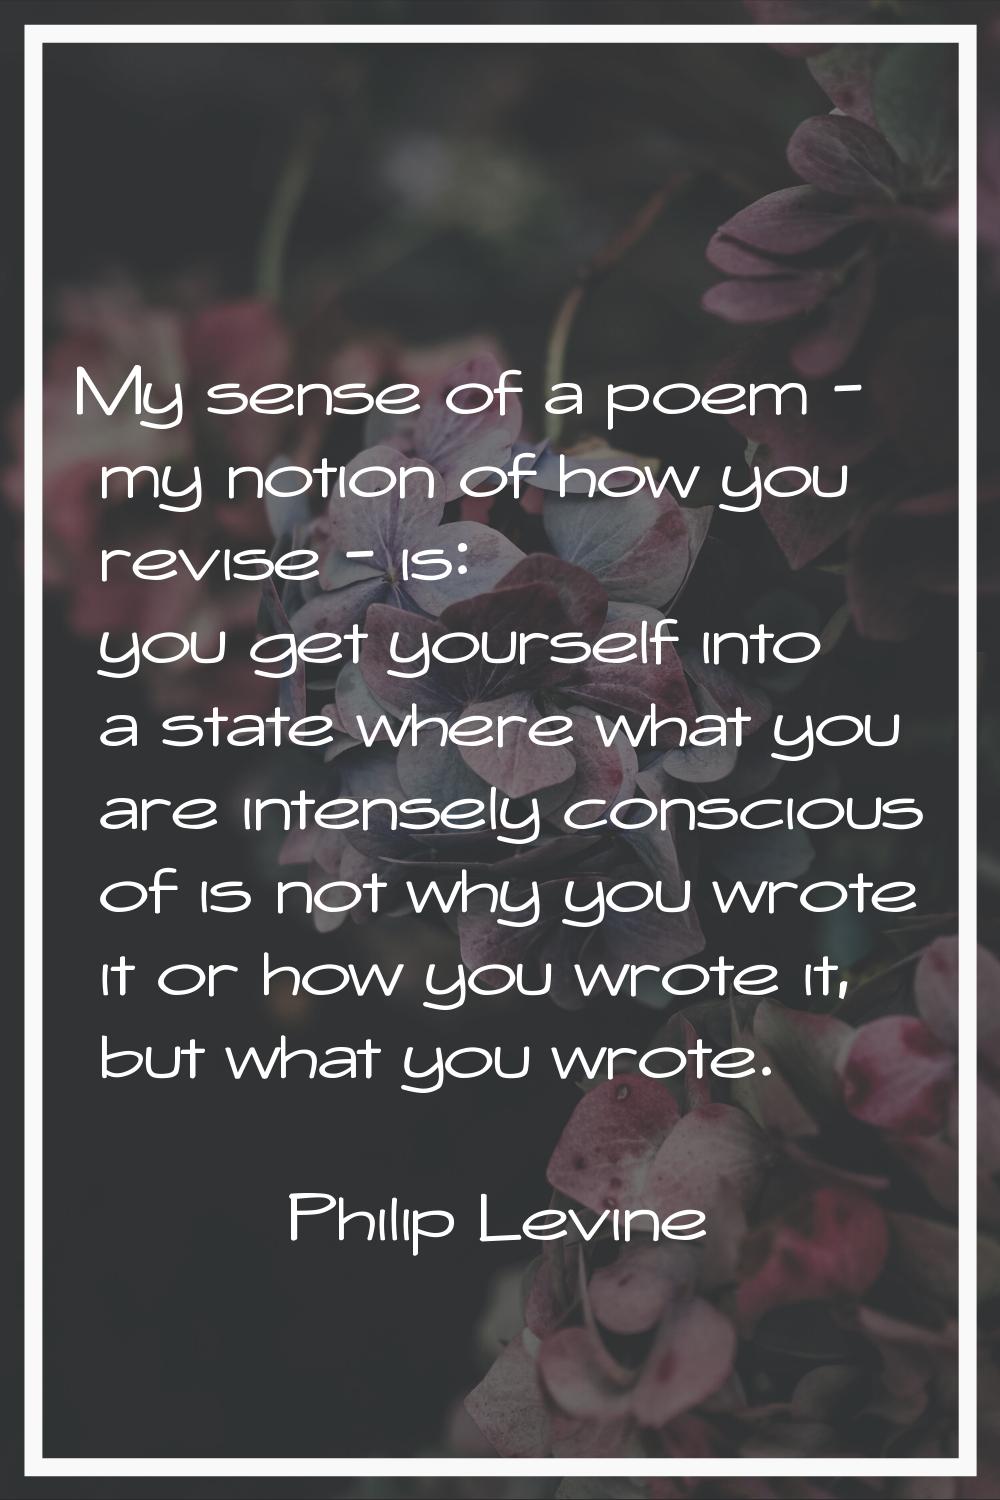 My sense of a poem - my notion of how you revise - is: you get yourself into a state where what you